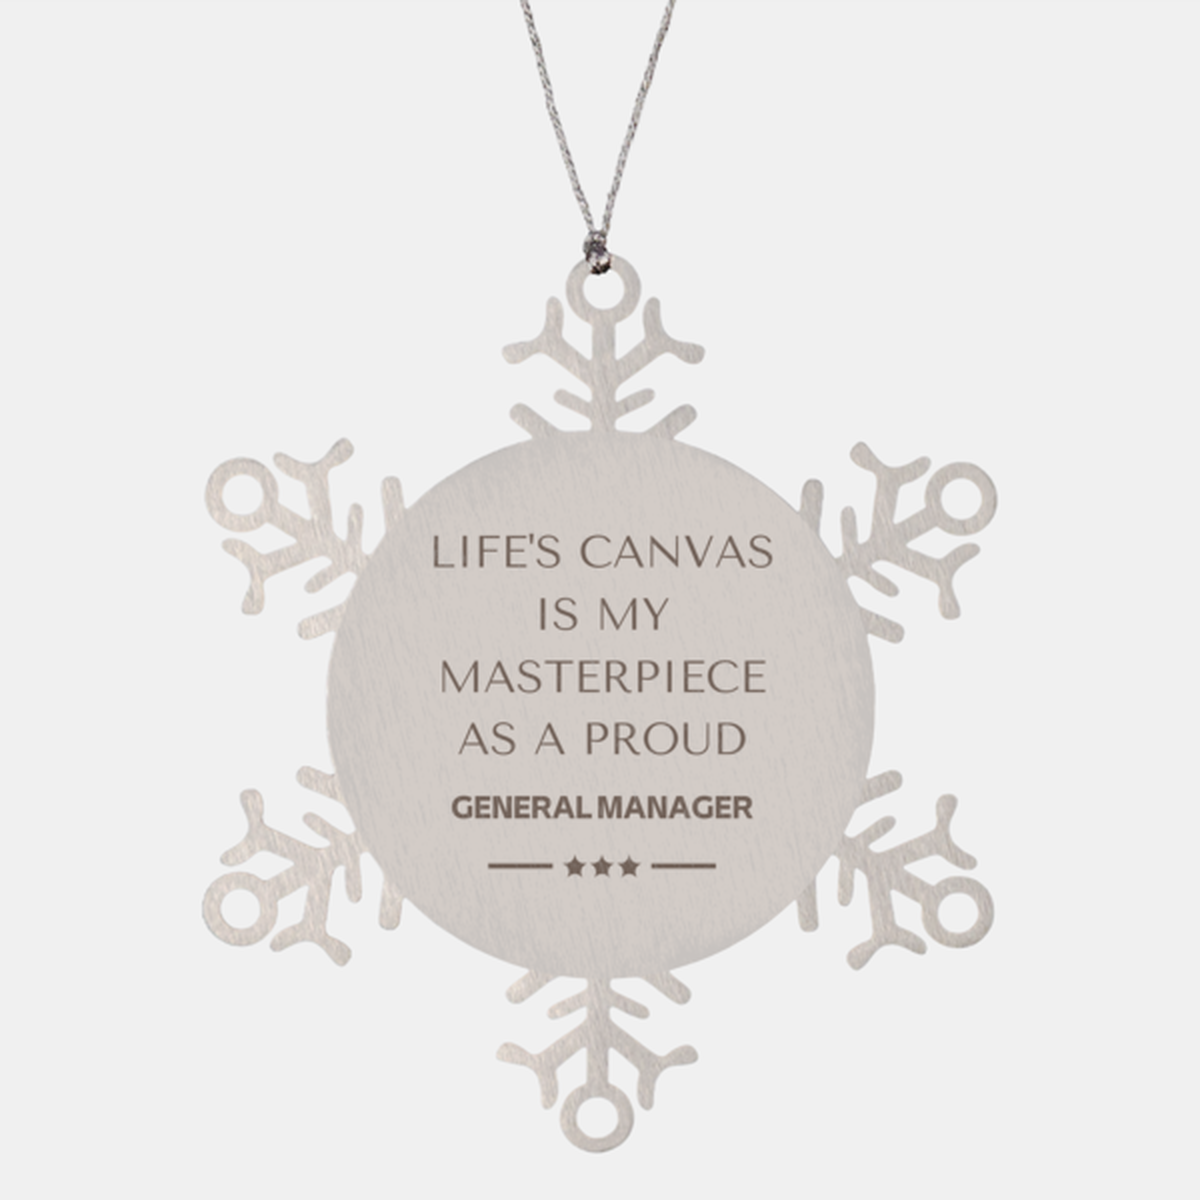 Proud General Manager Gifts, Life's canvas is my masterpiece, Epic Birthday Christmas Unique Snowflake Ornament For General Manager, Coworkers, Men, Women, Friends